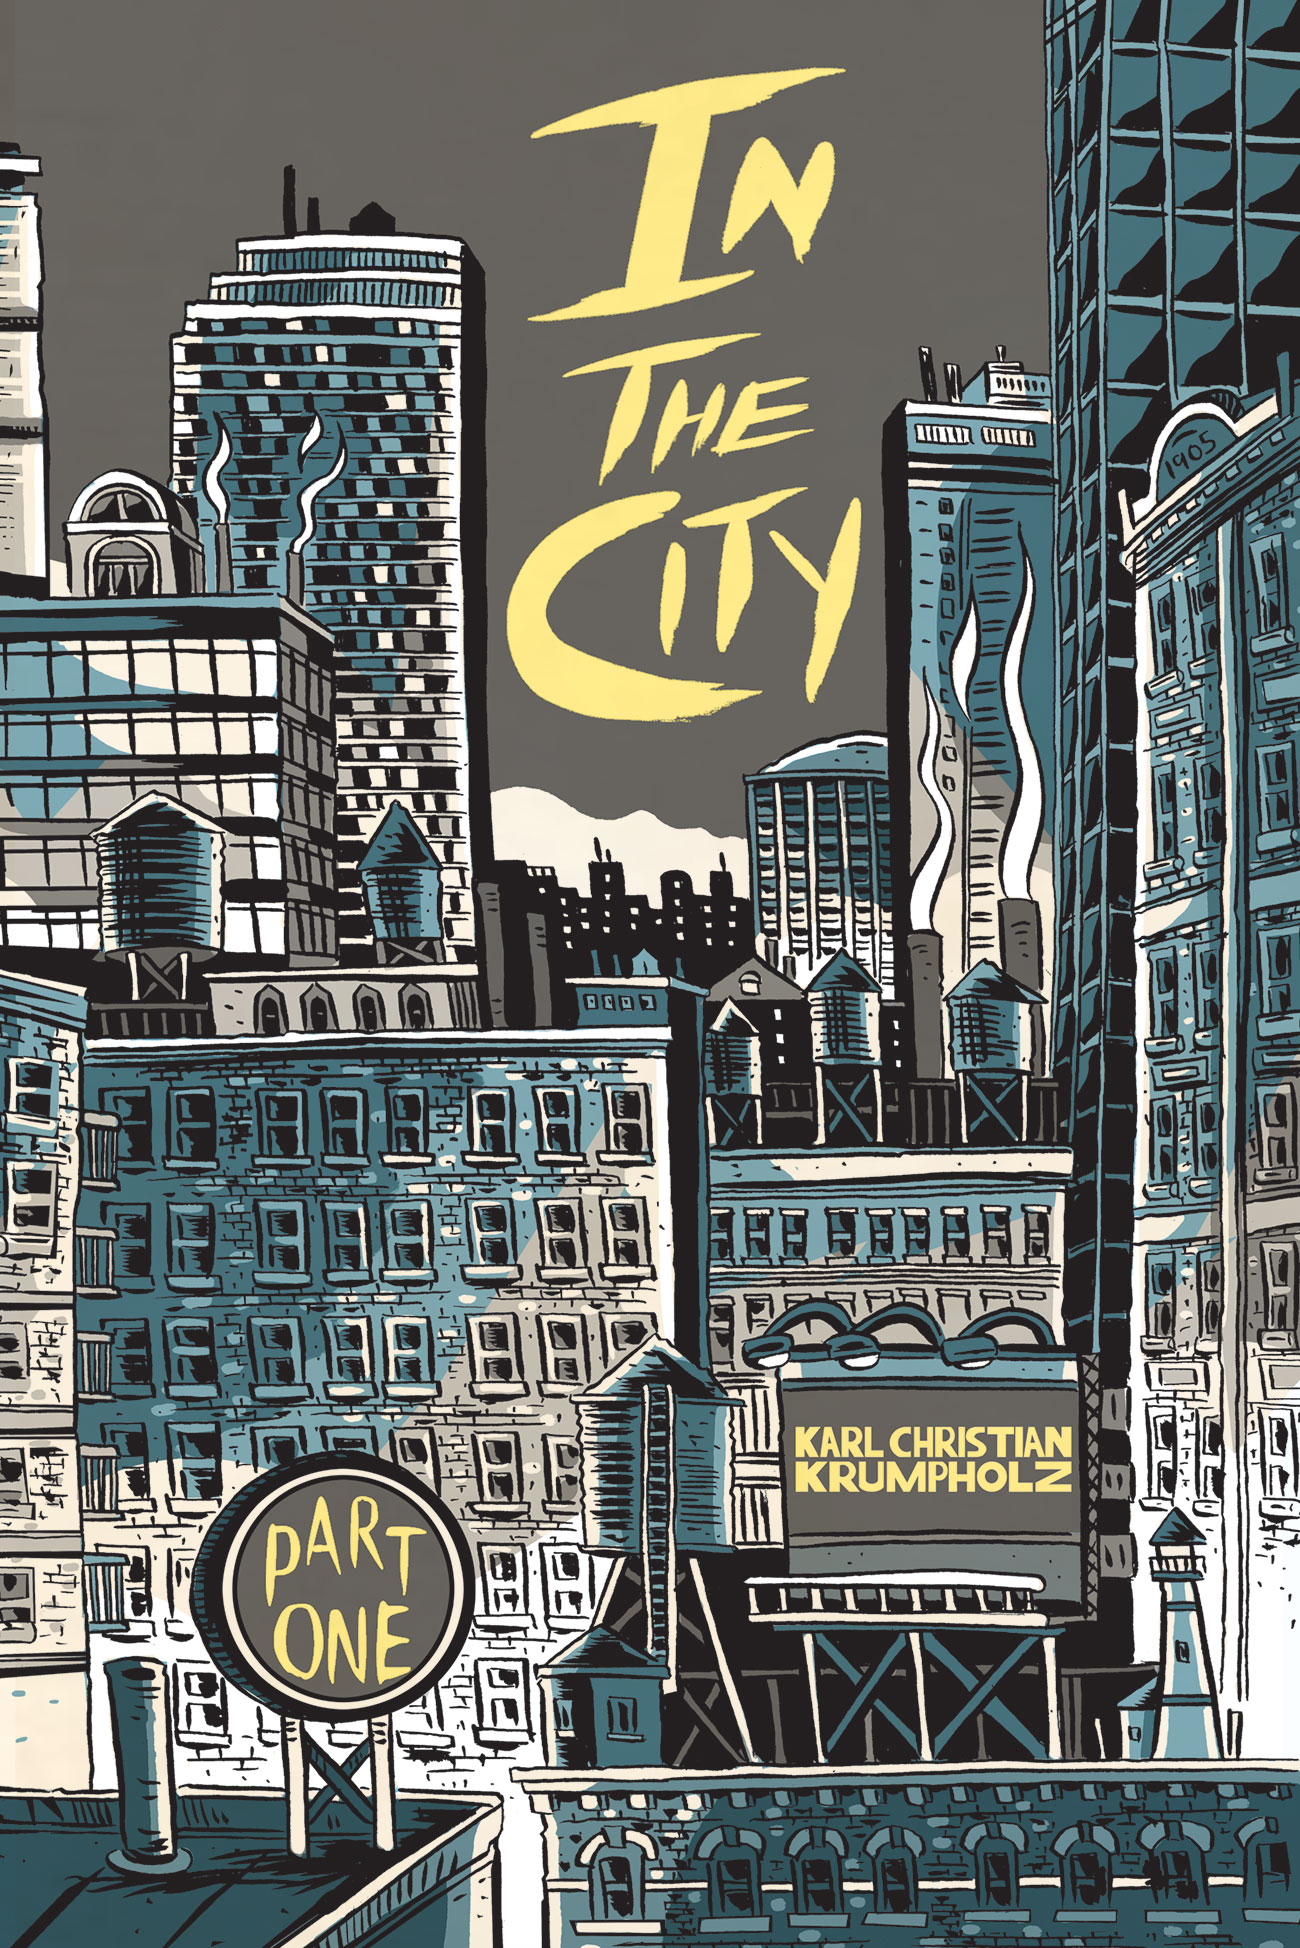 In The City, Part One